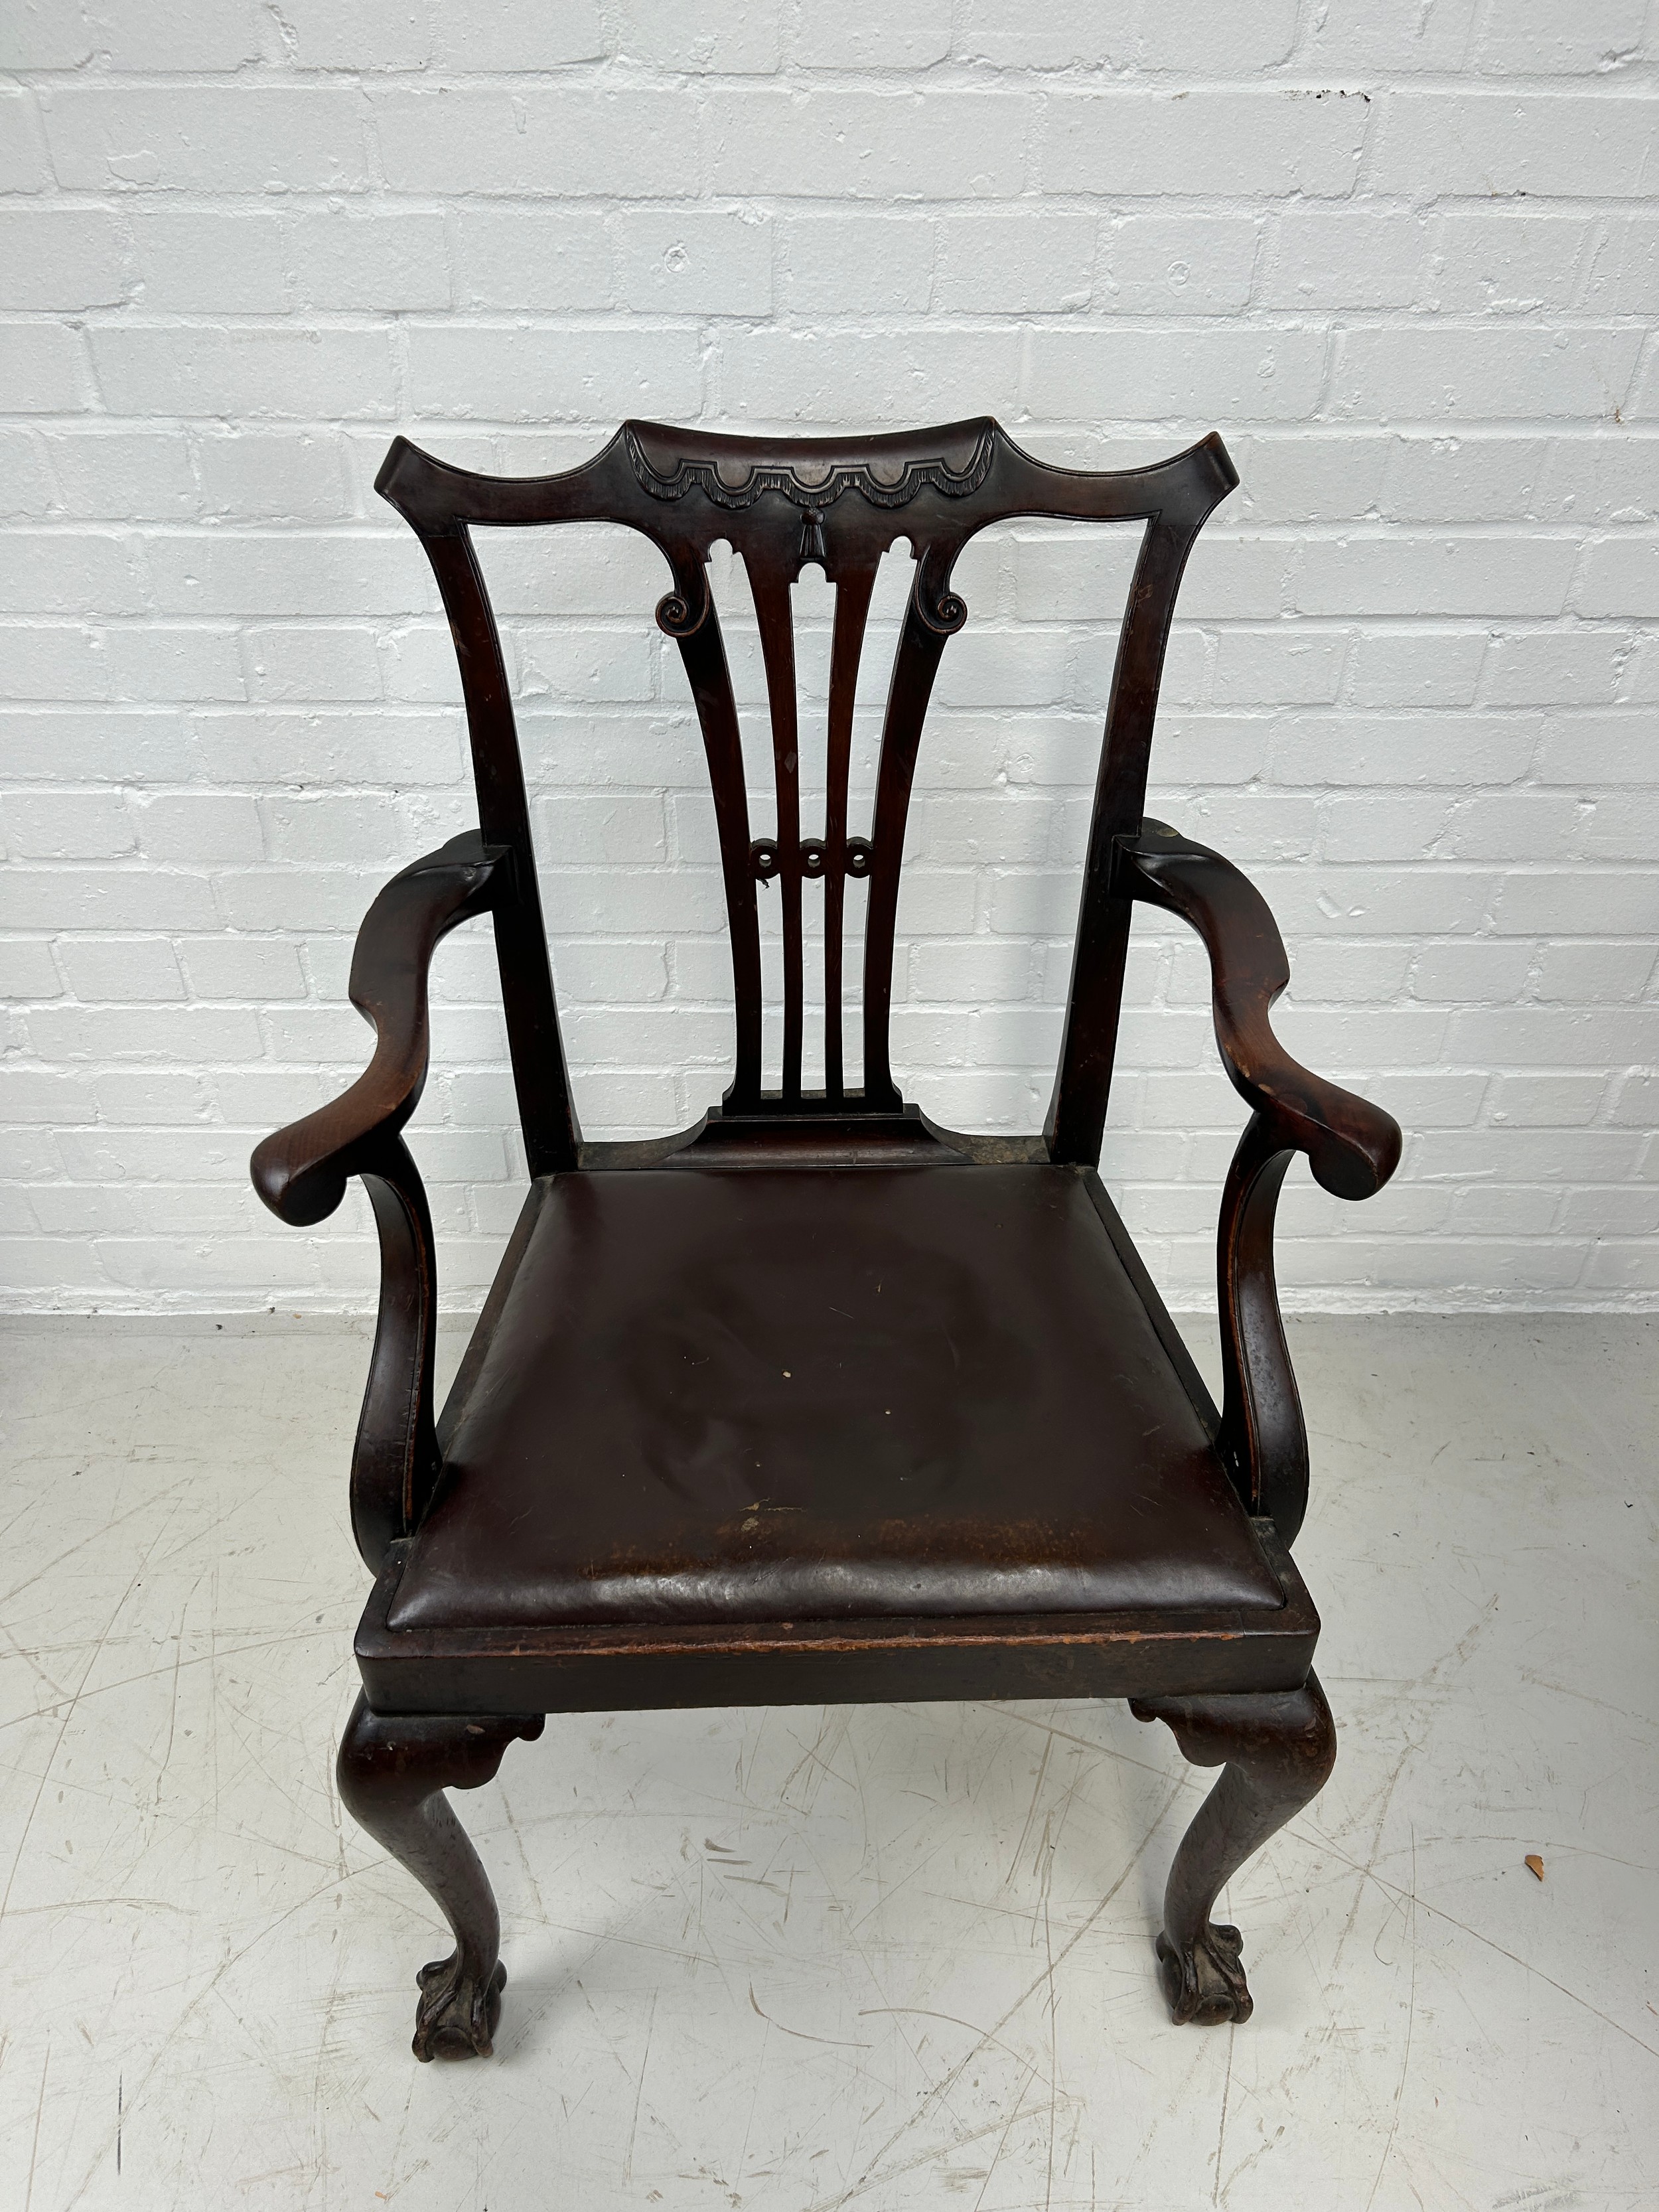 A CHIPPENDALE DESIGN DESK CHAIR WITH BROWN LEATHER SEAT AND CLAW AND BALL FEET, 96cm x 60cm x 46cm - Image 2 of 3